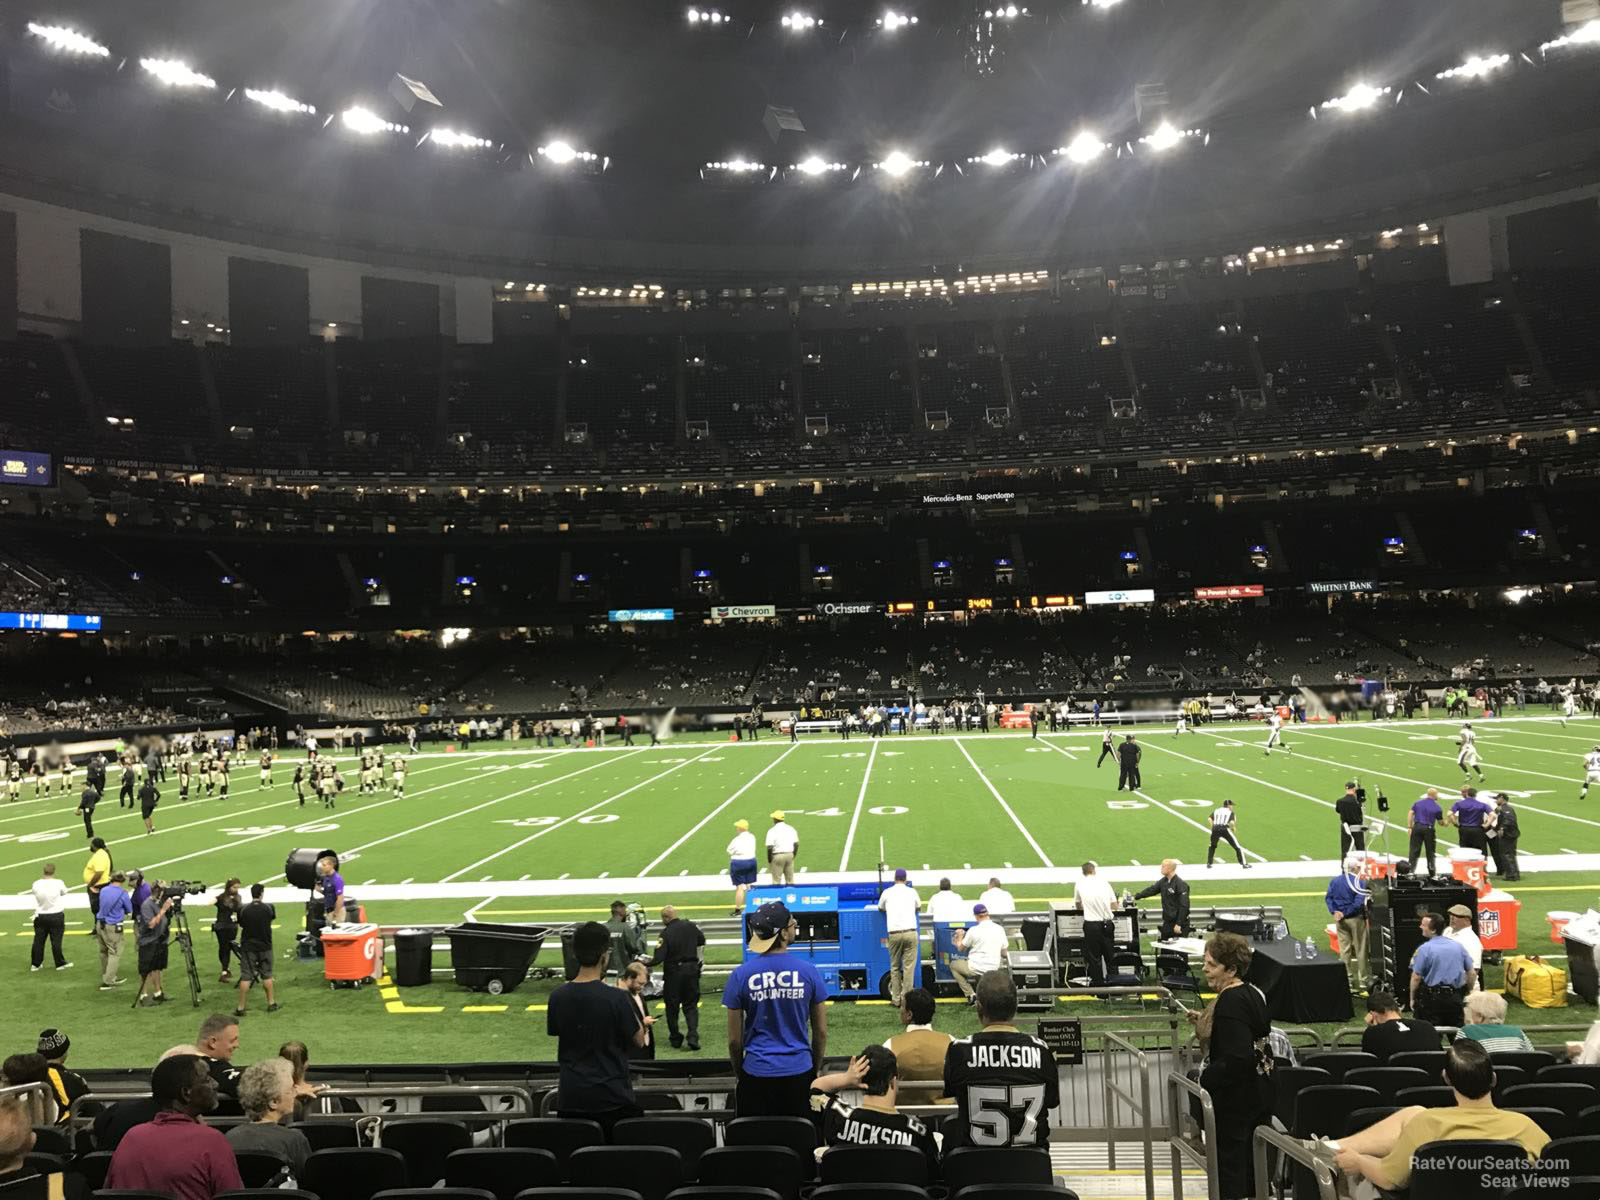 Saints Superdome Seating Chart With Rows And Seat Numbers Elcho Table